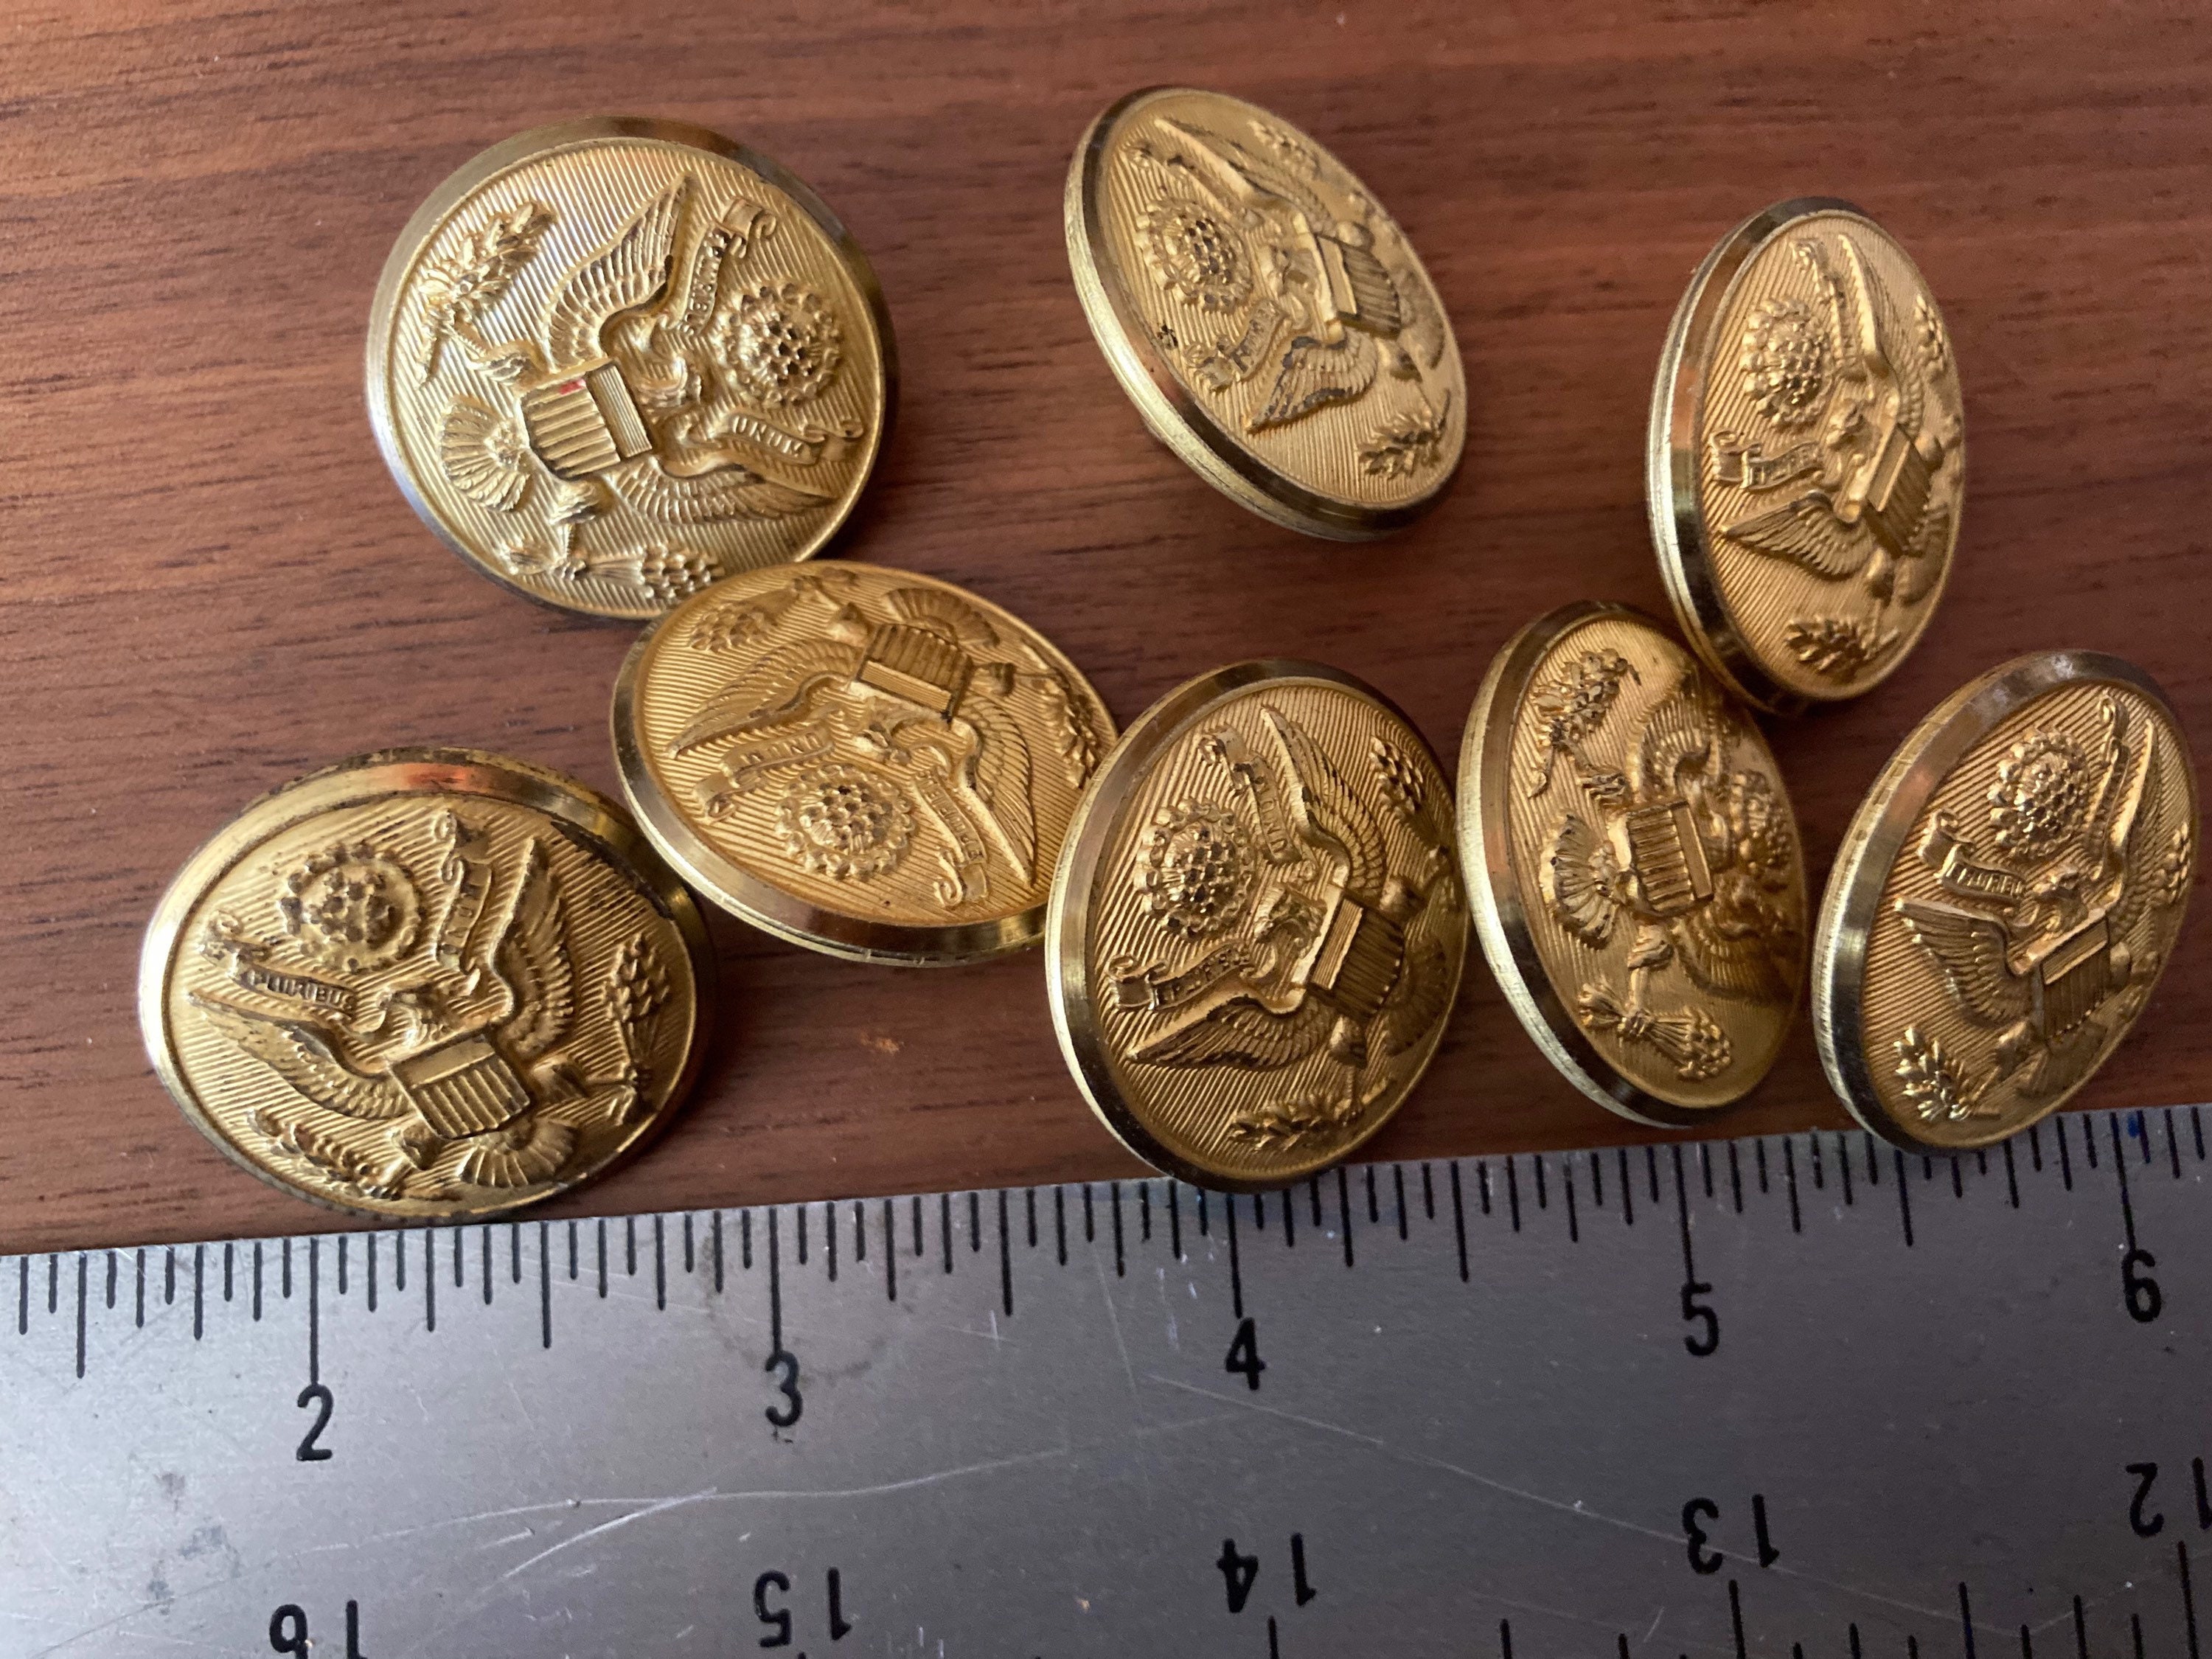 World War II vintage Army overcoat buttons | Etsy